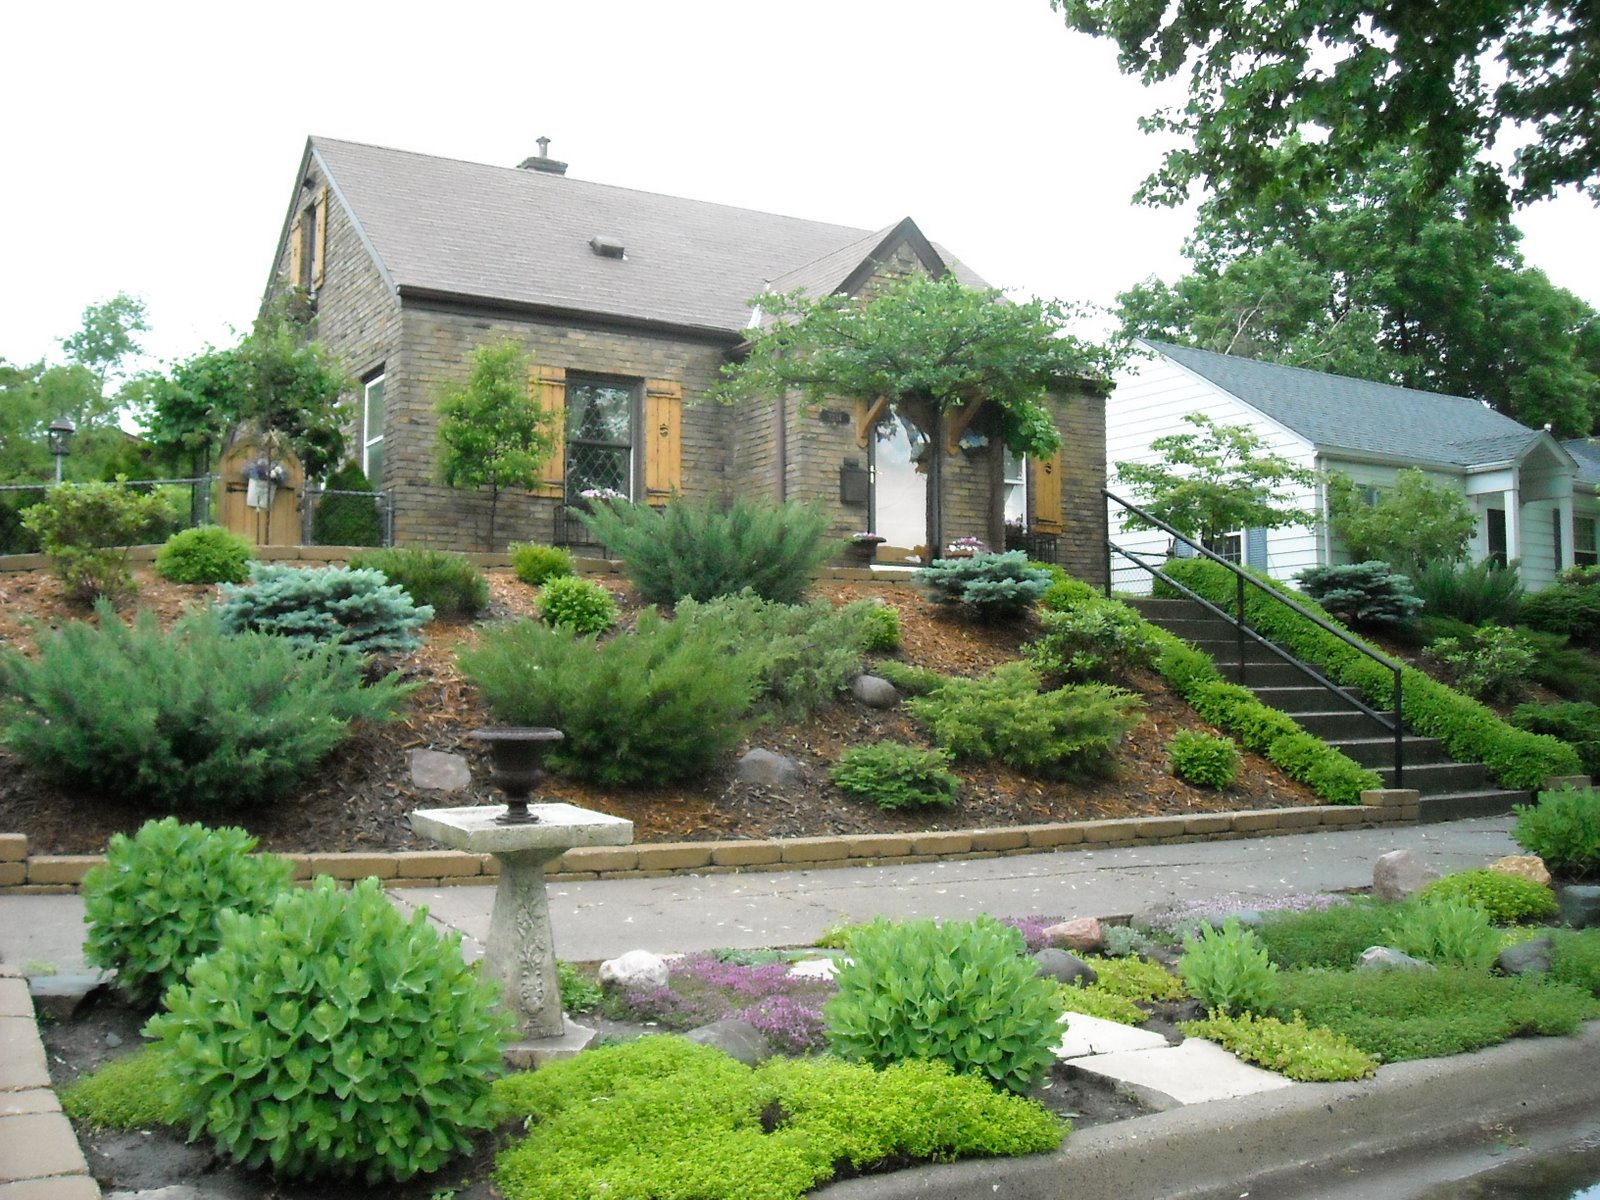 Landscaping: Landscaping Ideas For Front Yard On Hill